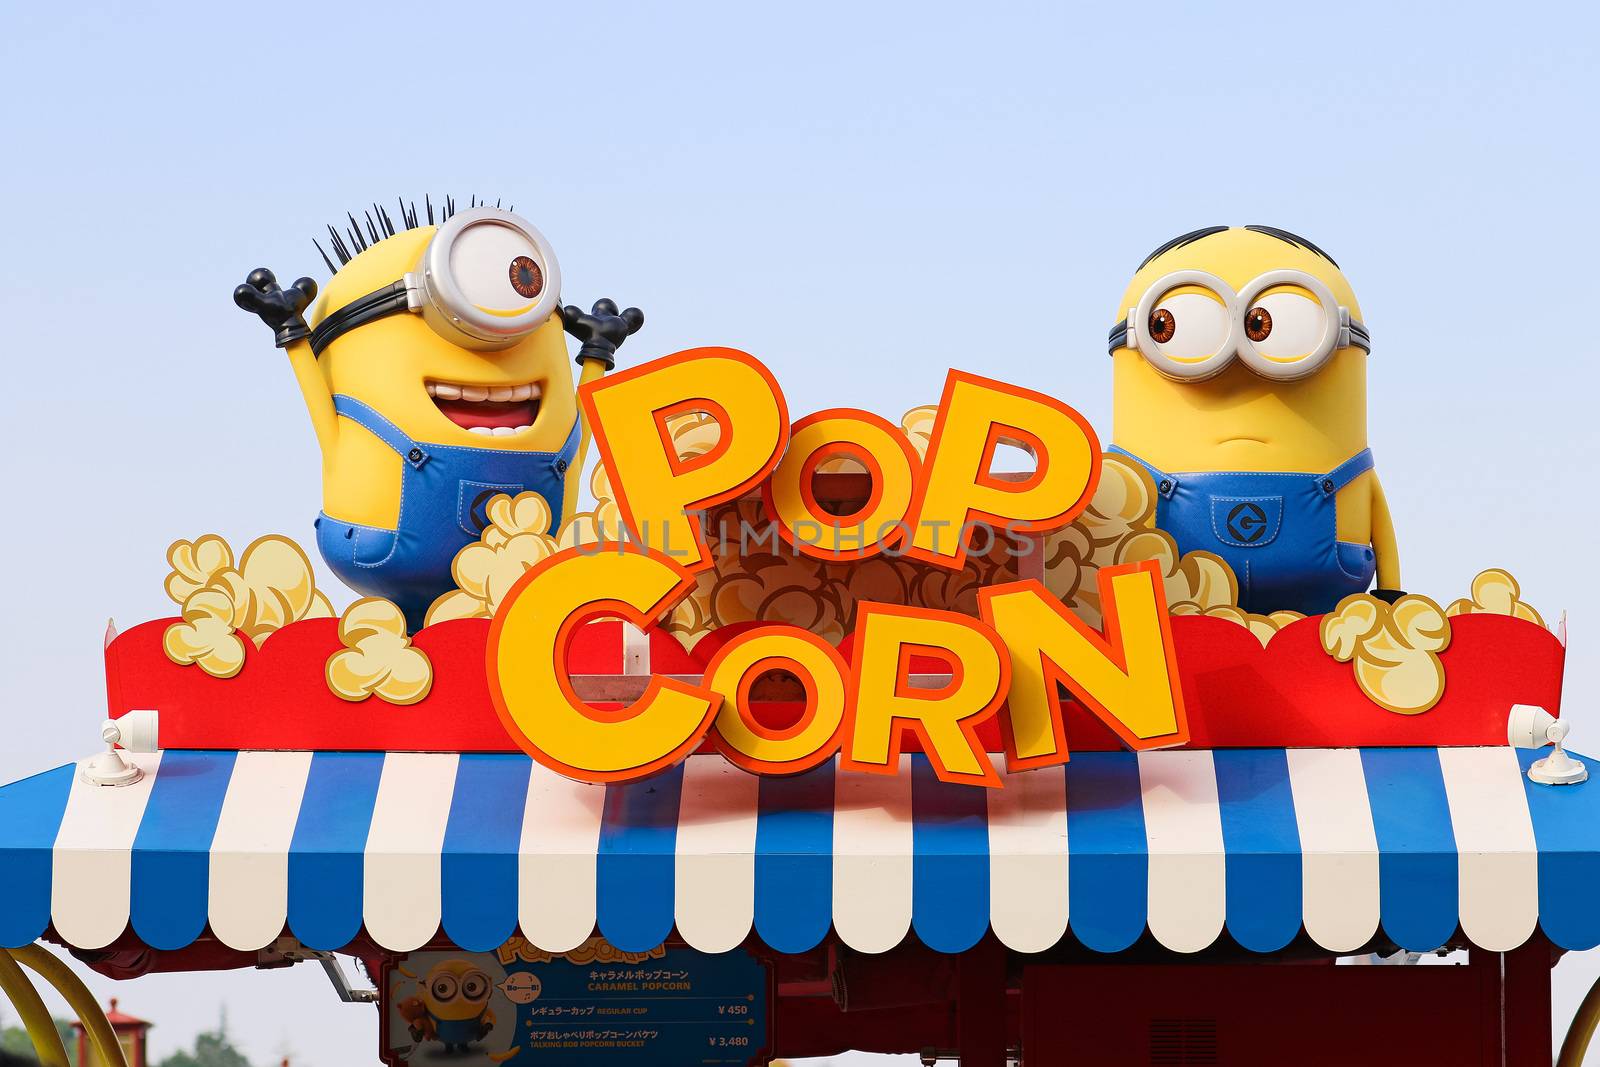 OSAKA, JAPAN - JAN 07, 2017 : Photo of "HAPPY MINION POP CORN SHOP", selling Minion Pop Corn, located in Universal Studios, Osaka, Japan. Minions are famous character from Despicable Me animation.